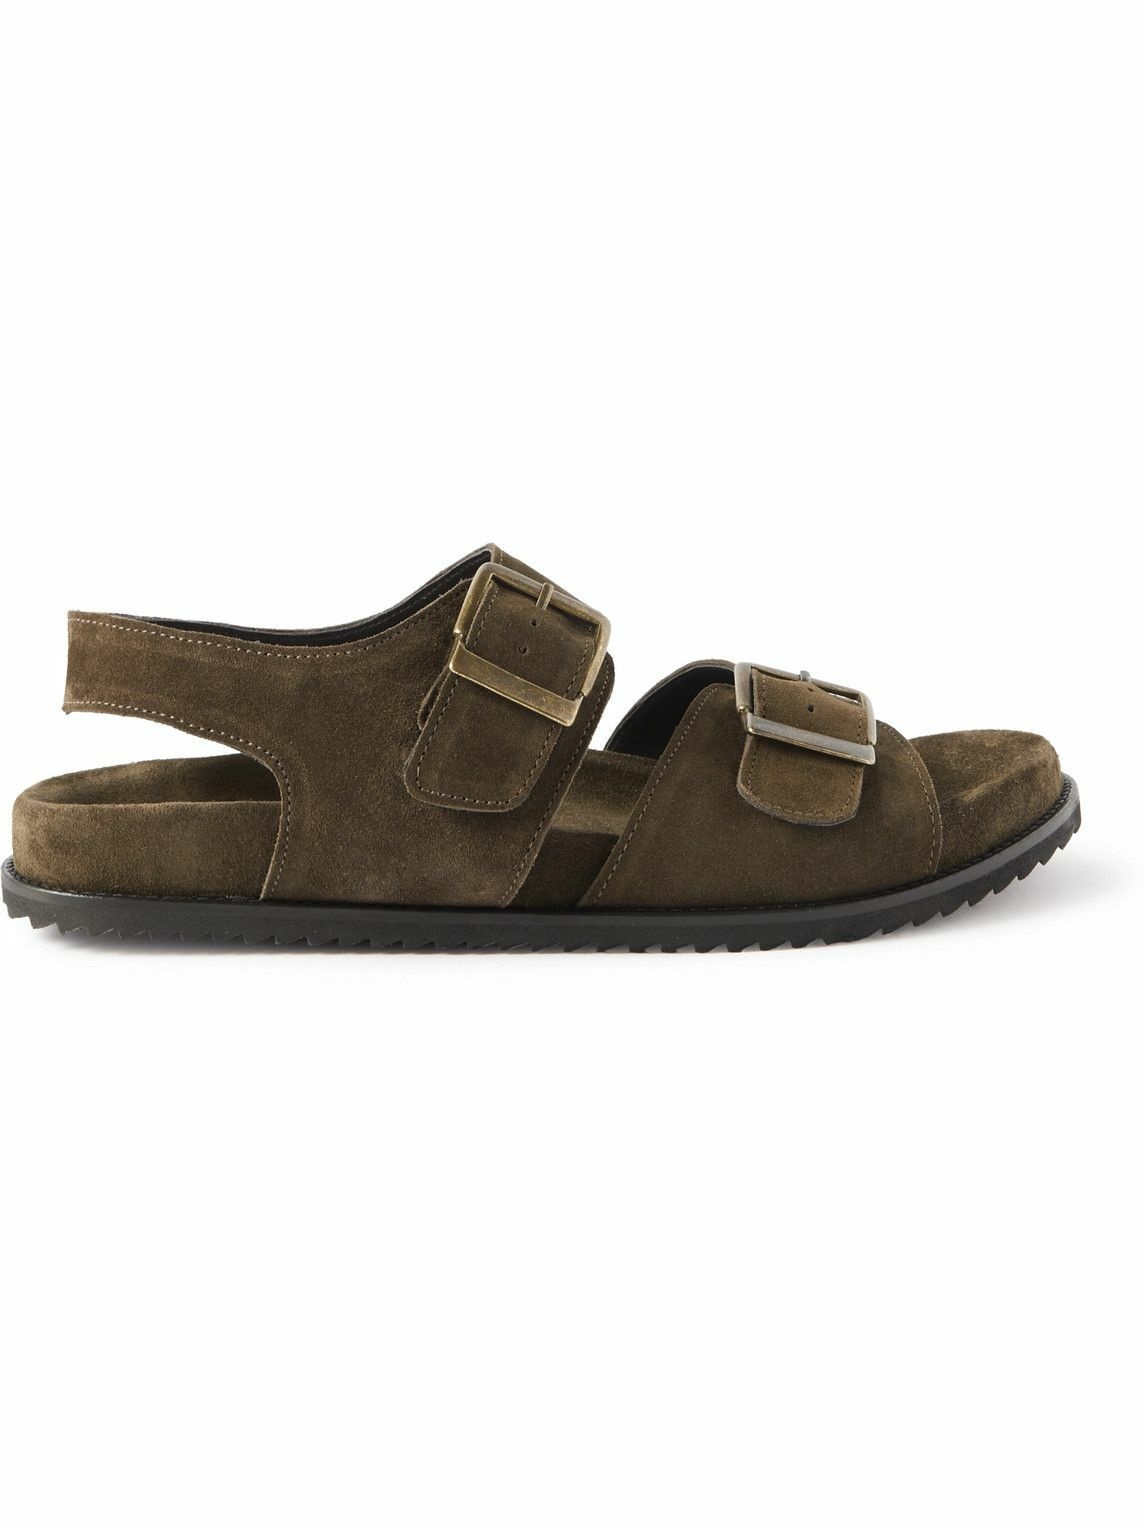 Mr P. - David Buckled Regenerated Suede by evolo® Sandals - Brown Mr P.